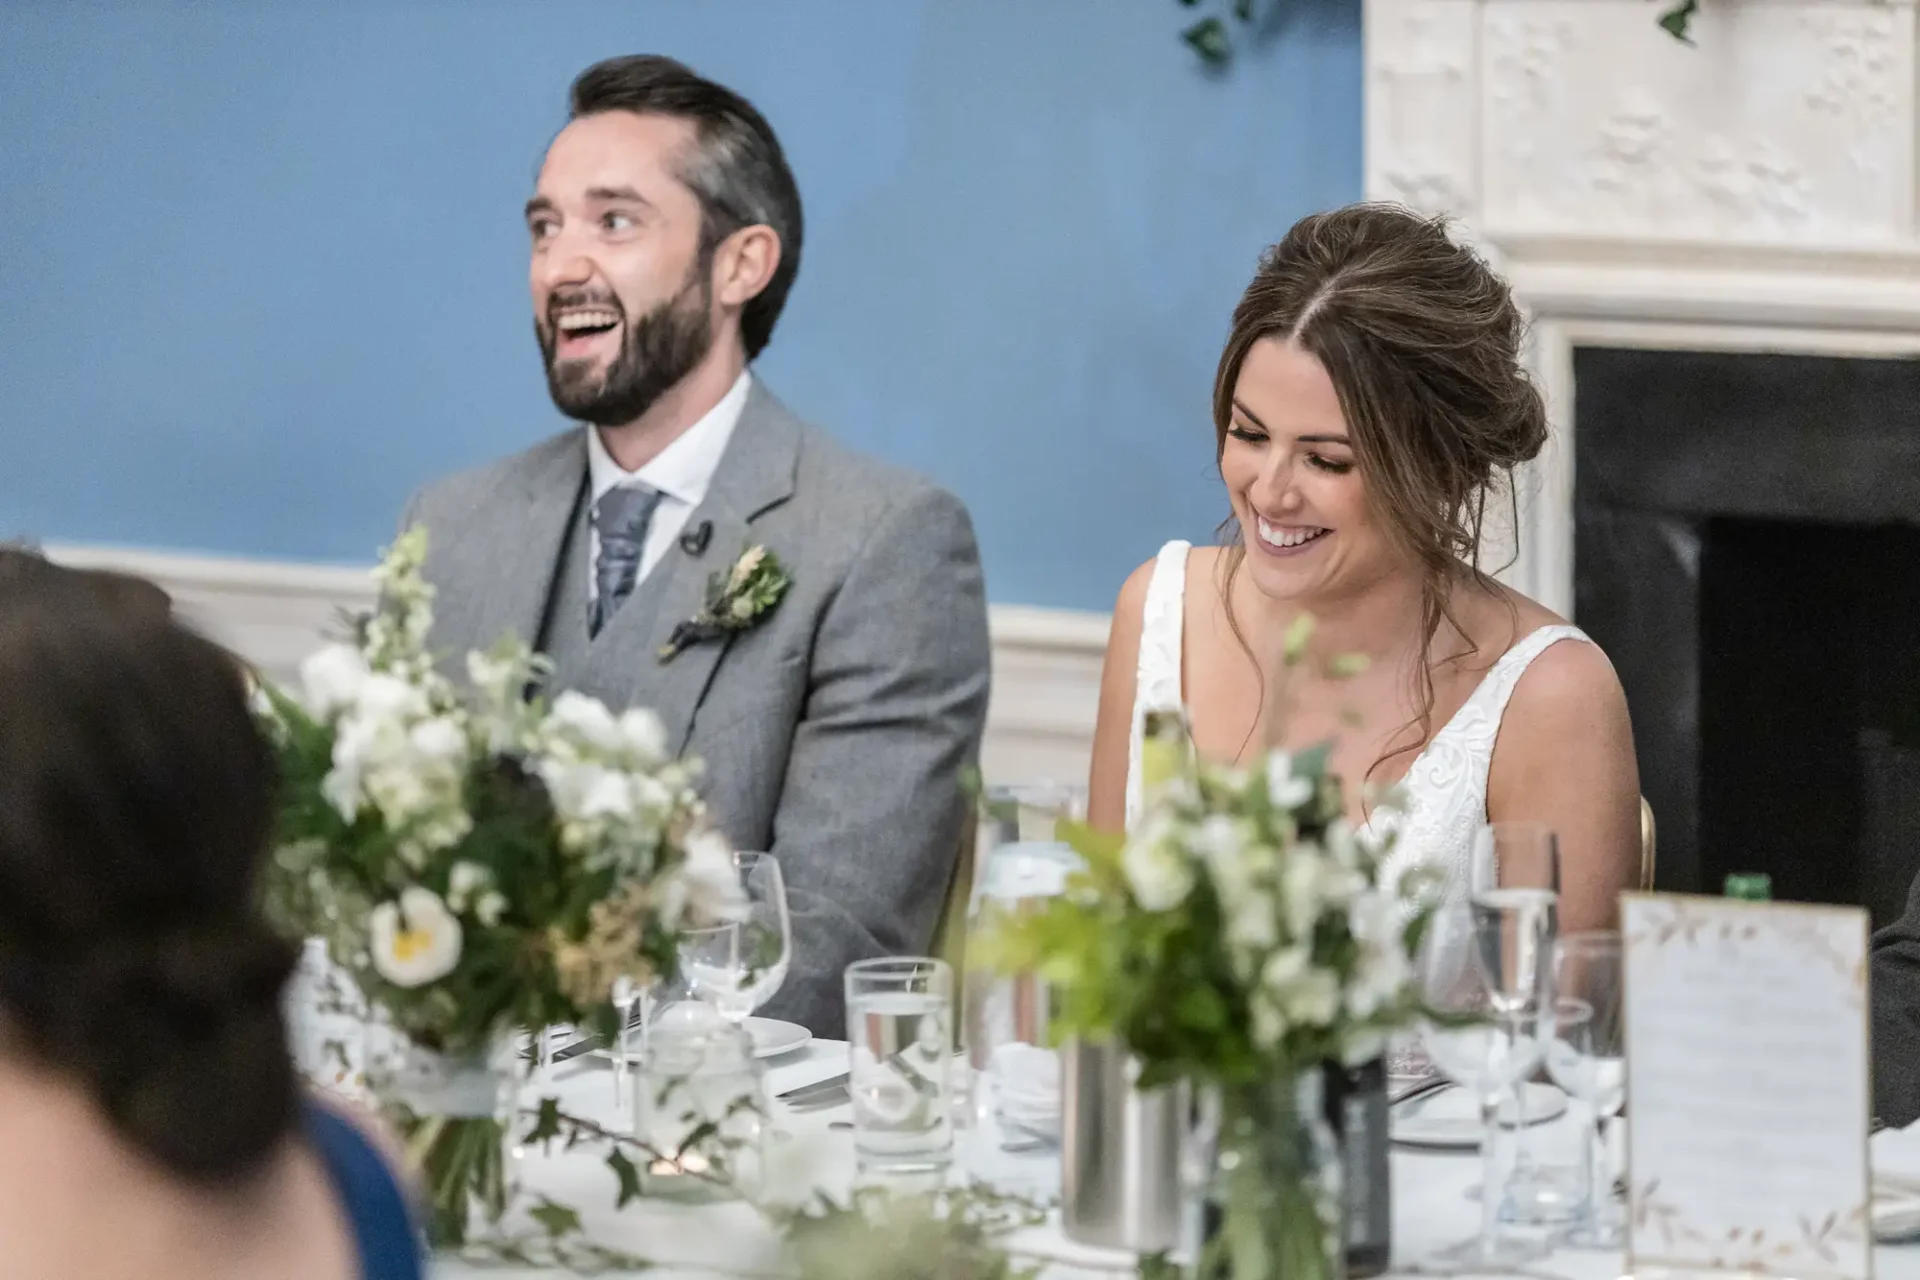 A bride and groom laugh joyfully at a wedding reception table, surrounded by elegant floral arrangements.